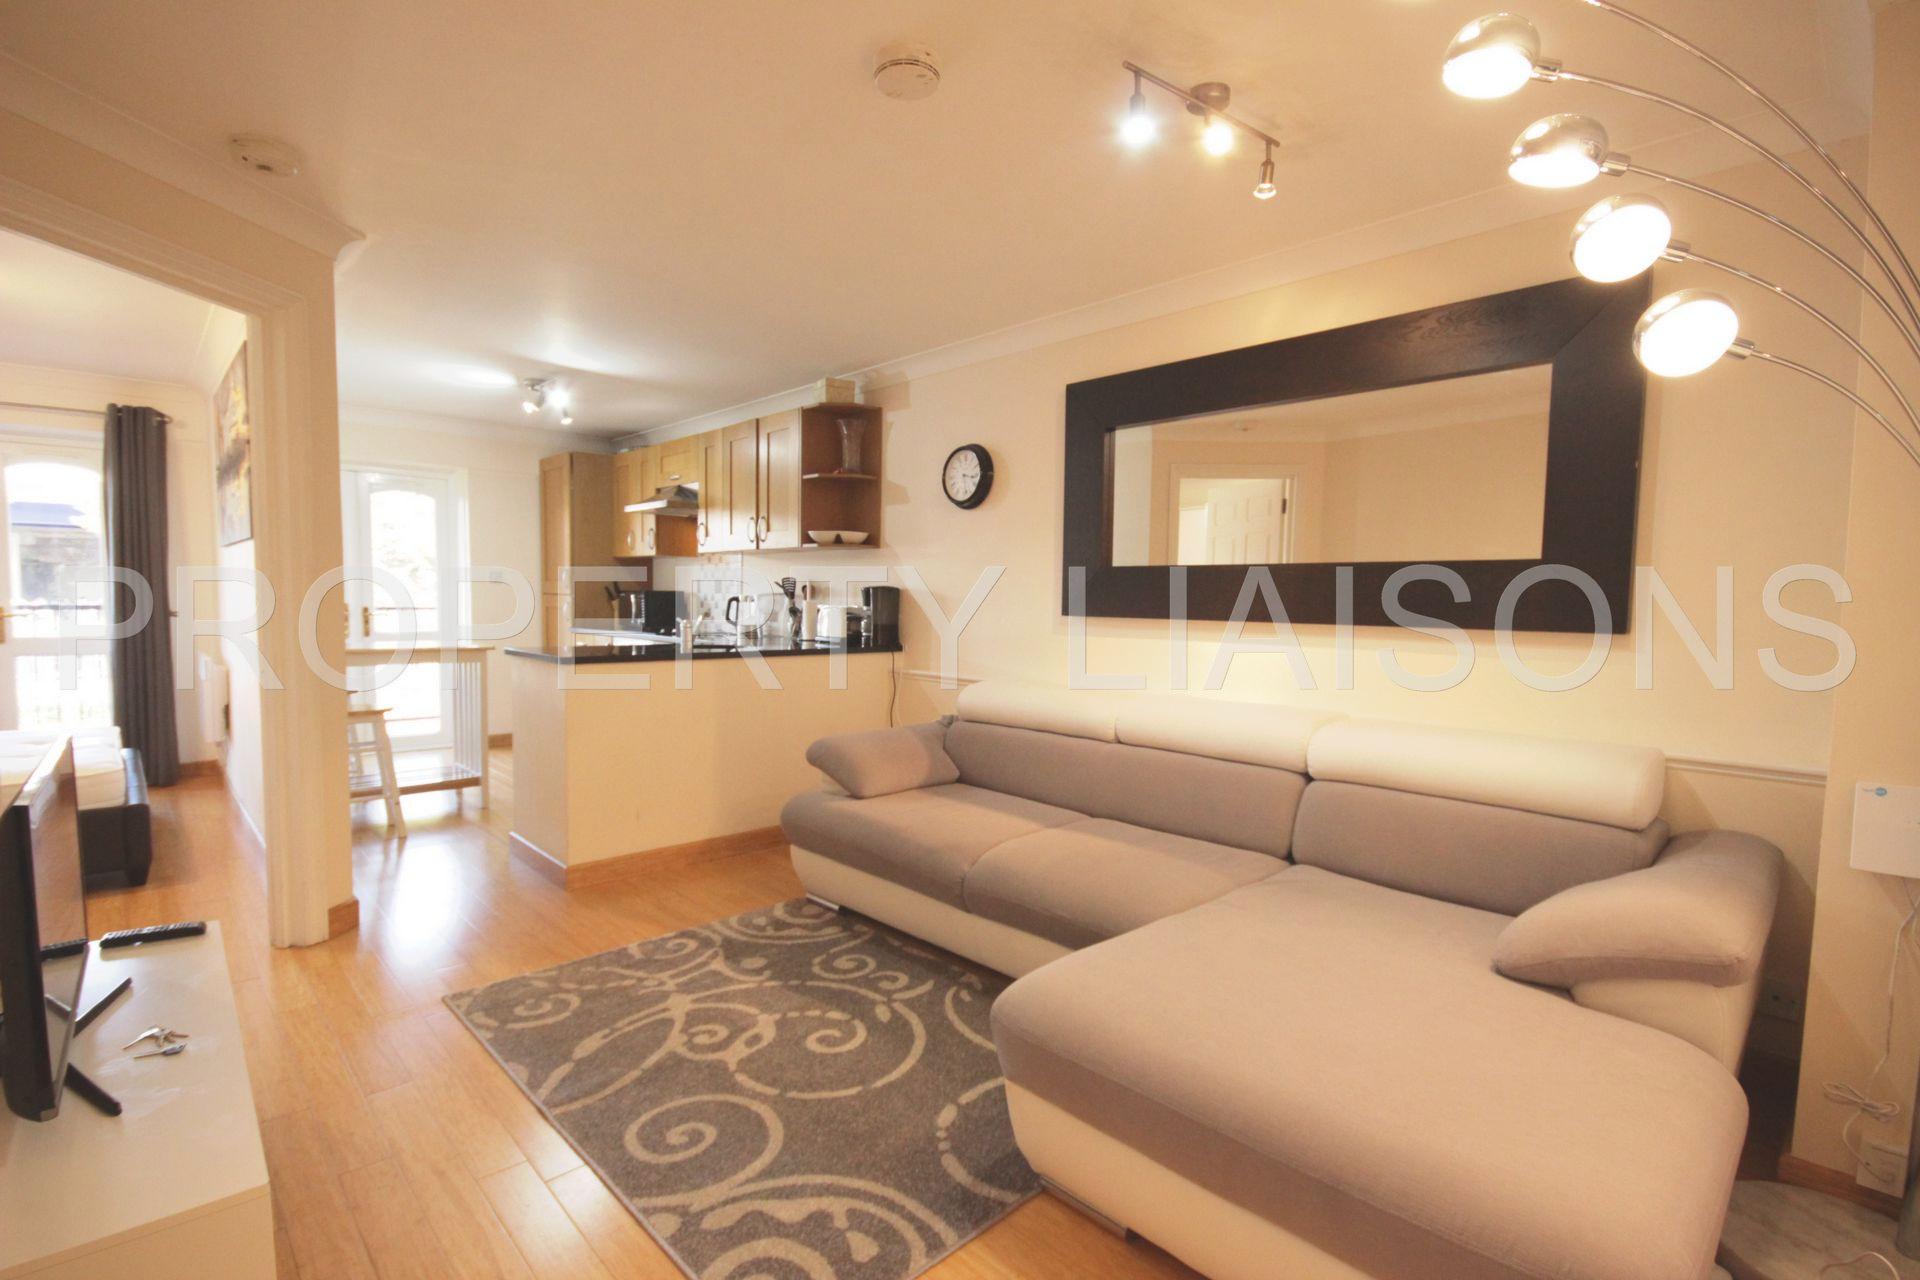 1 Bedroom Apartment to rent in , London, E1